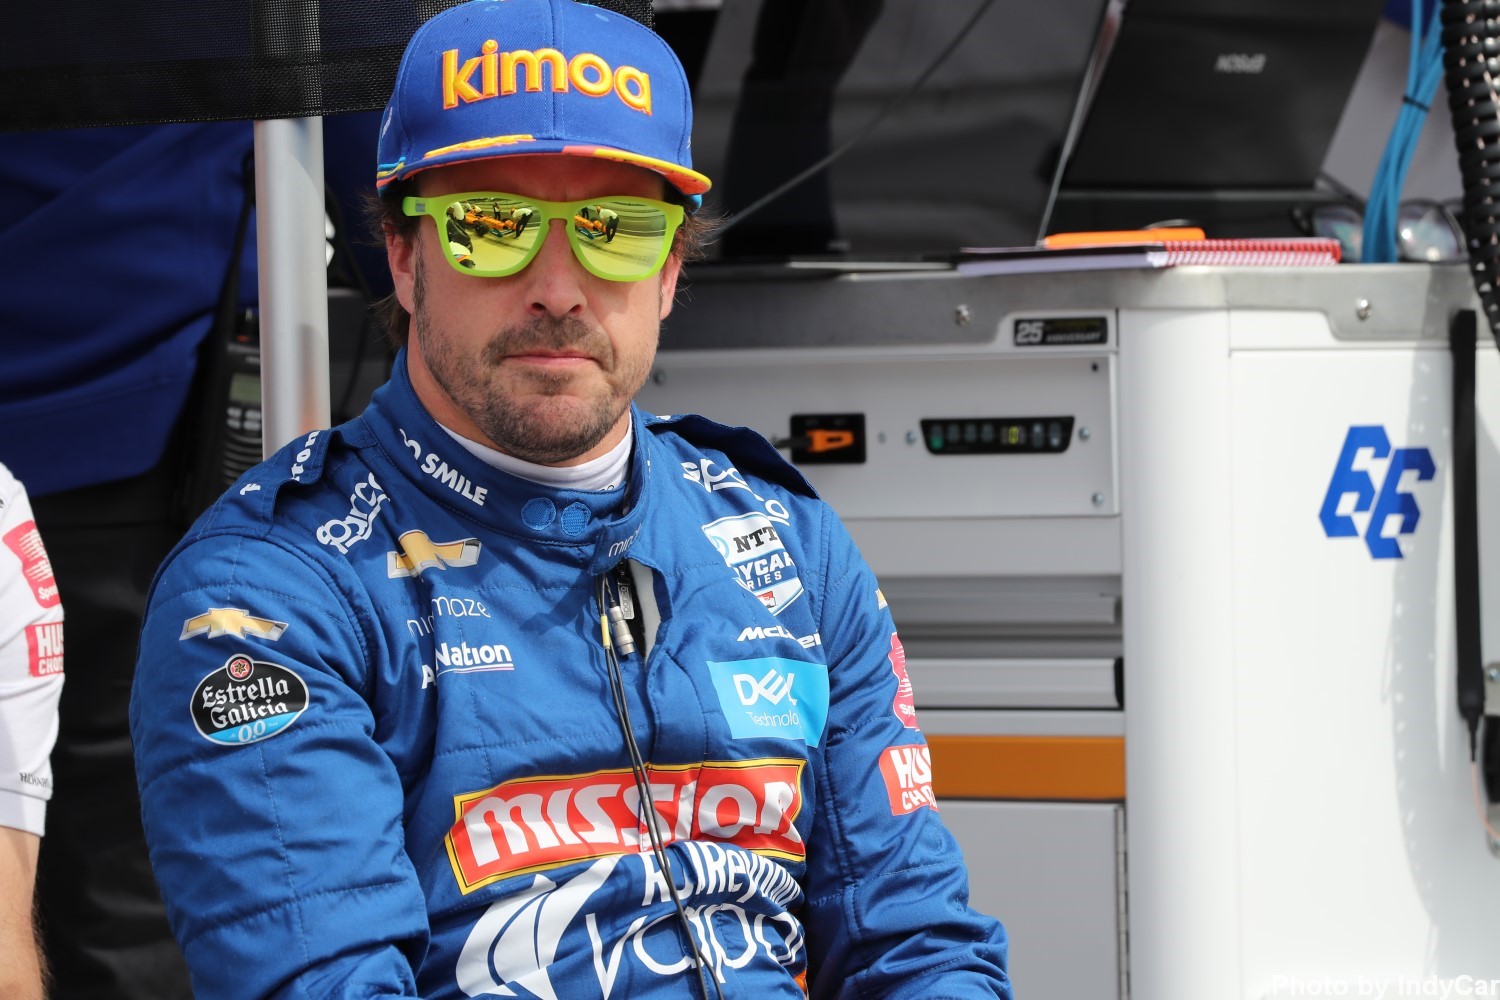 Fernando Alonso at Indy in 2019